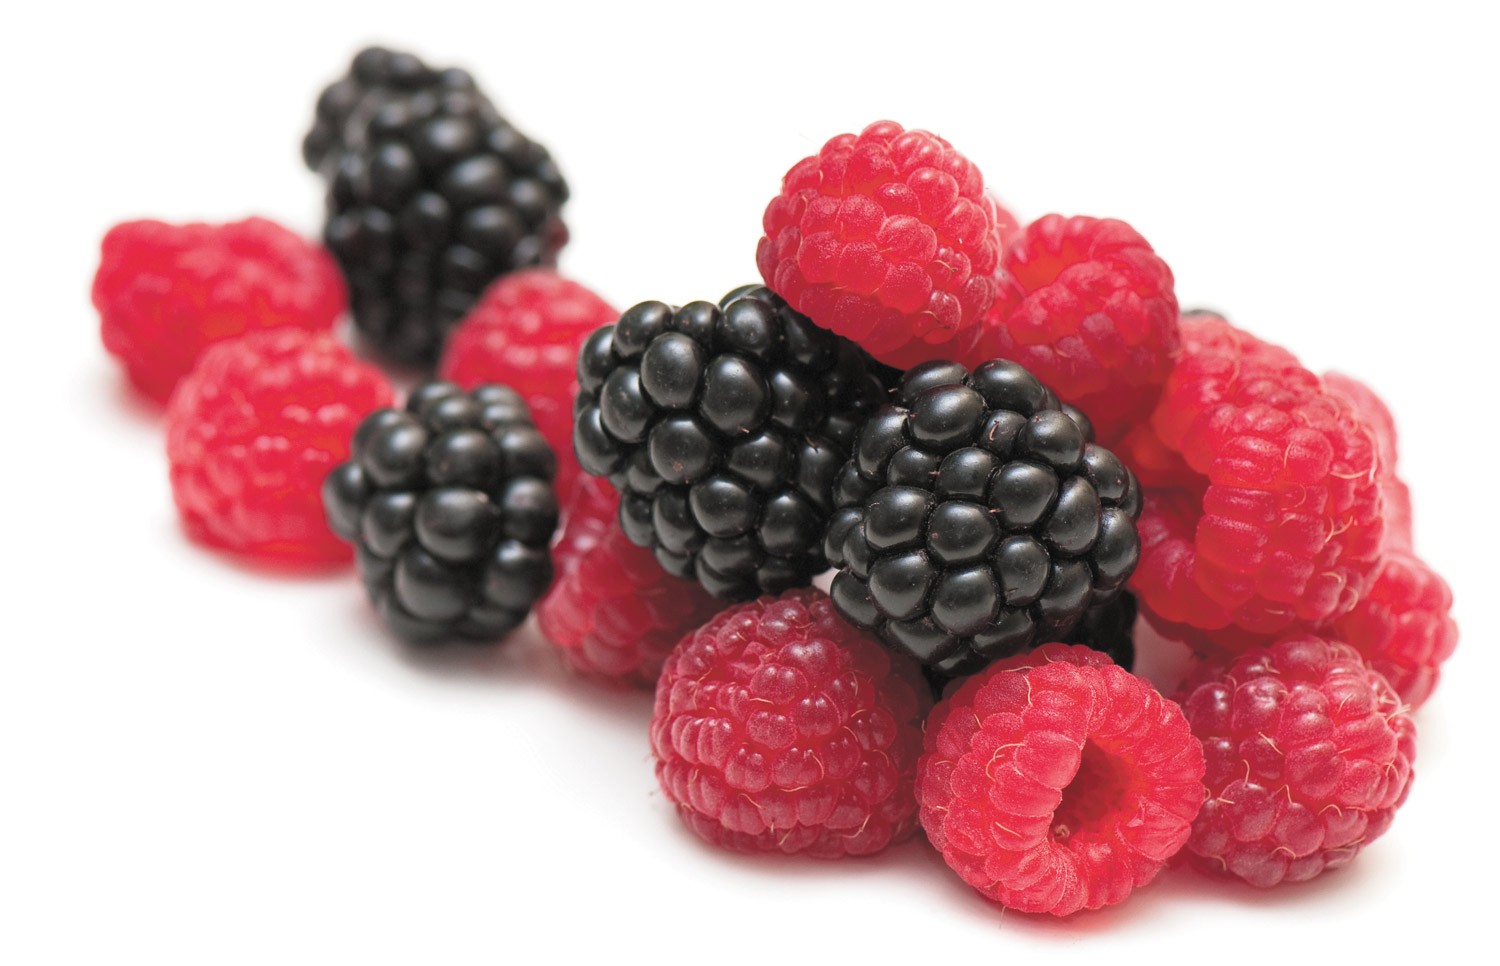 Whether you pick or purchase, berries are a delight